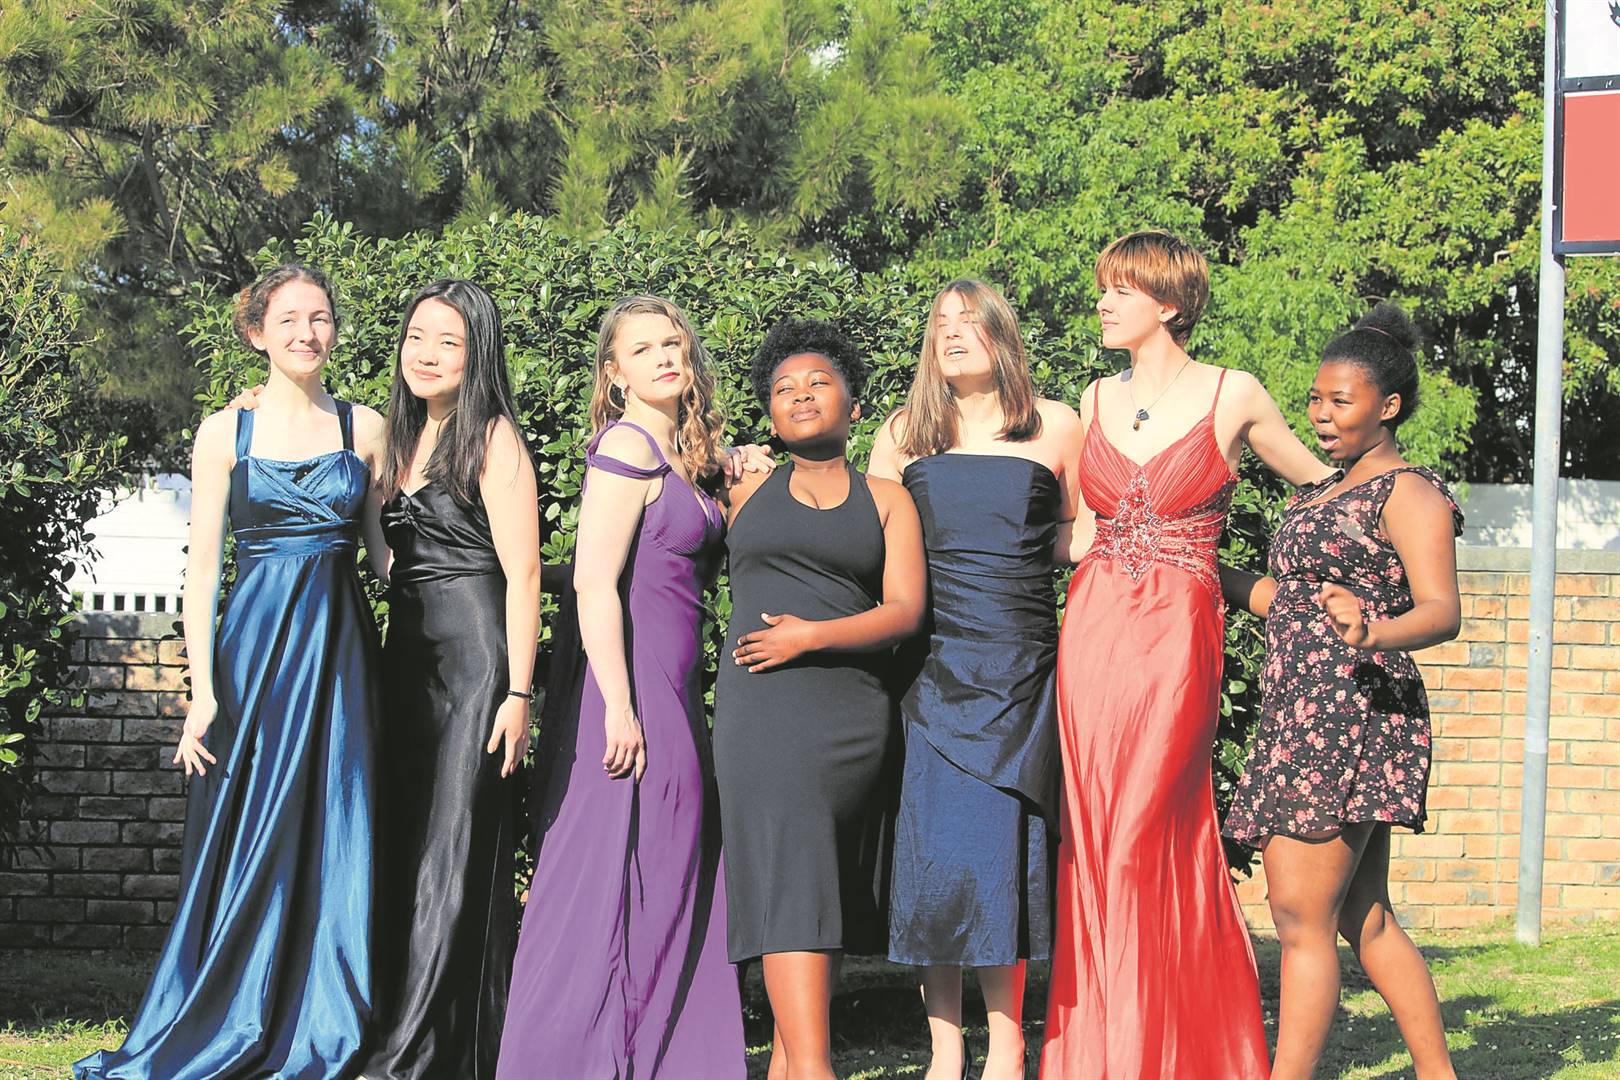 Pre-loved dressed from Cape Town and the UK are donated to local matriculants on the Cape Flats. PHOTO: Supplied